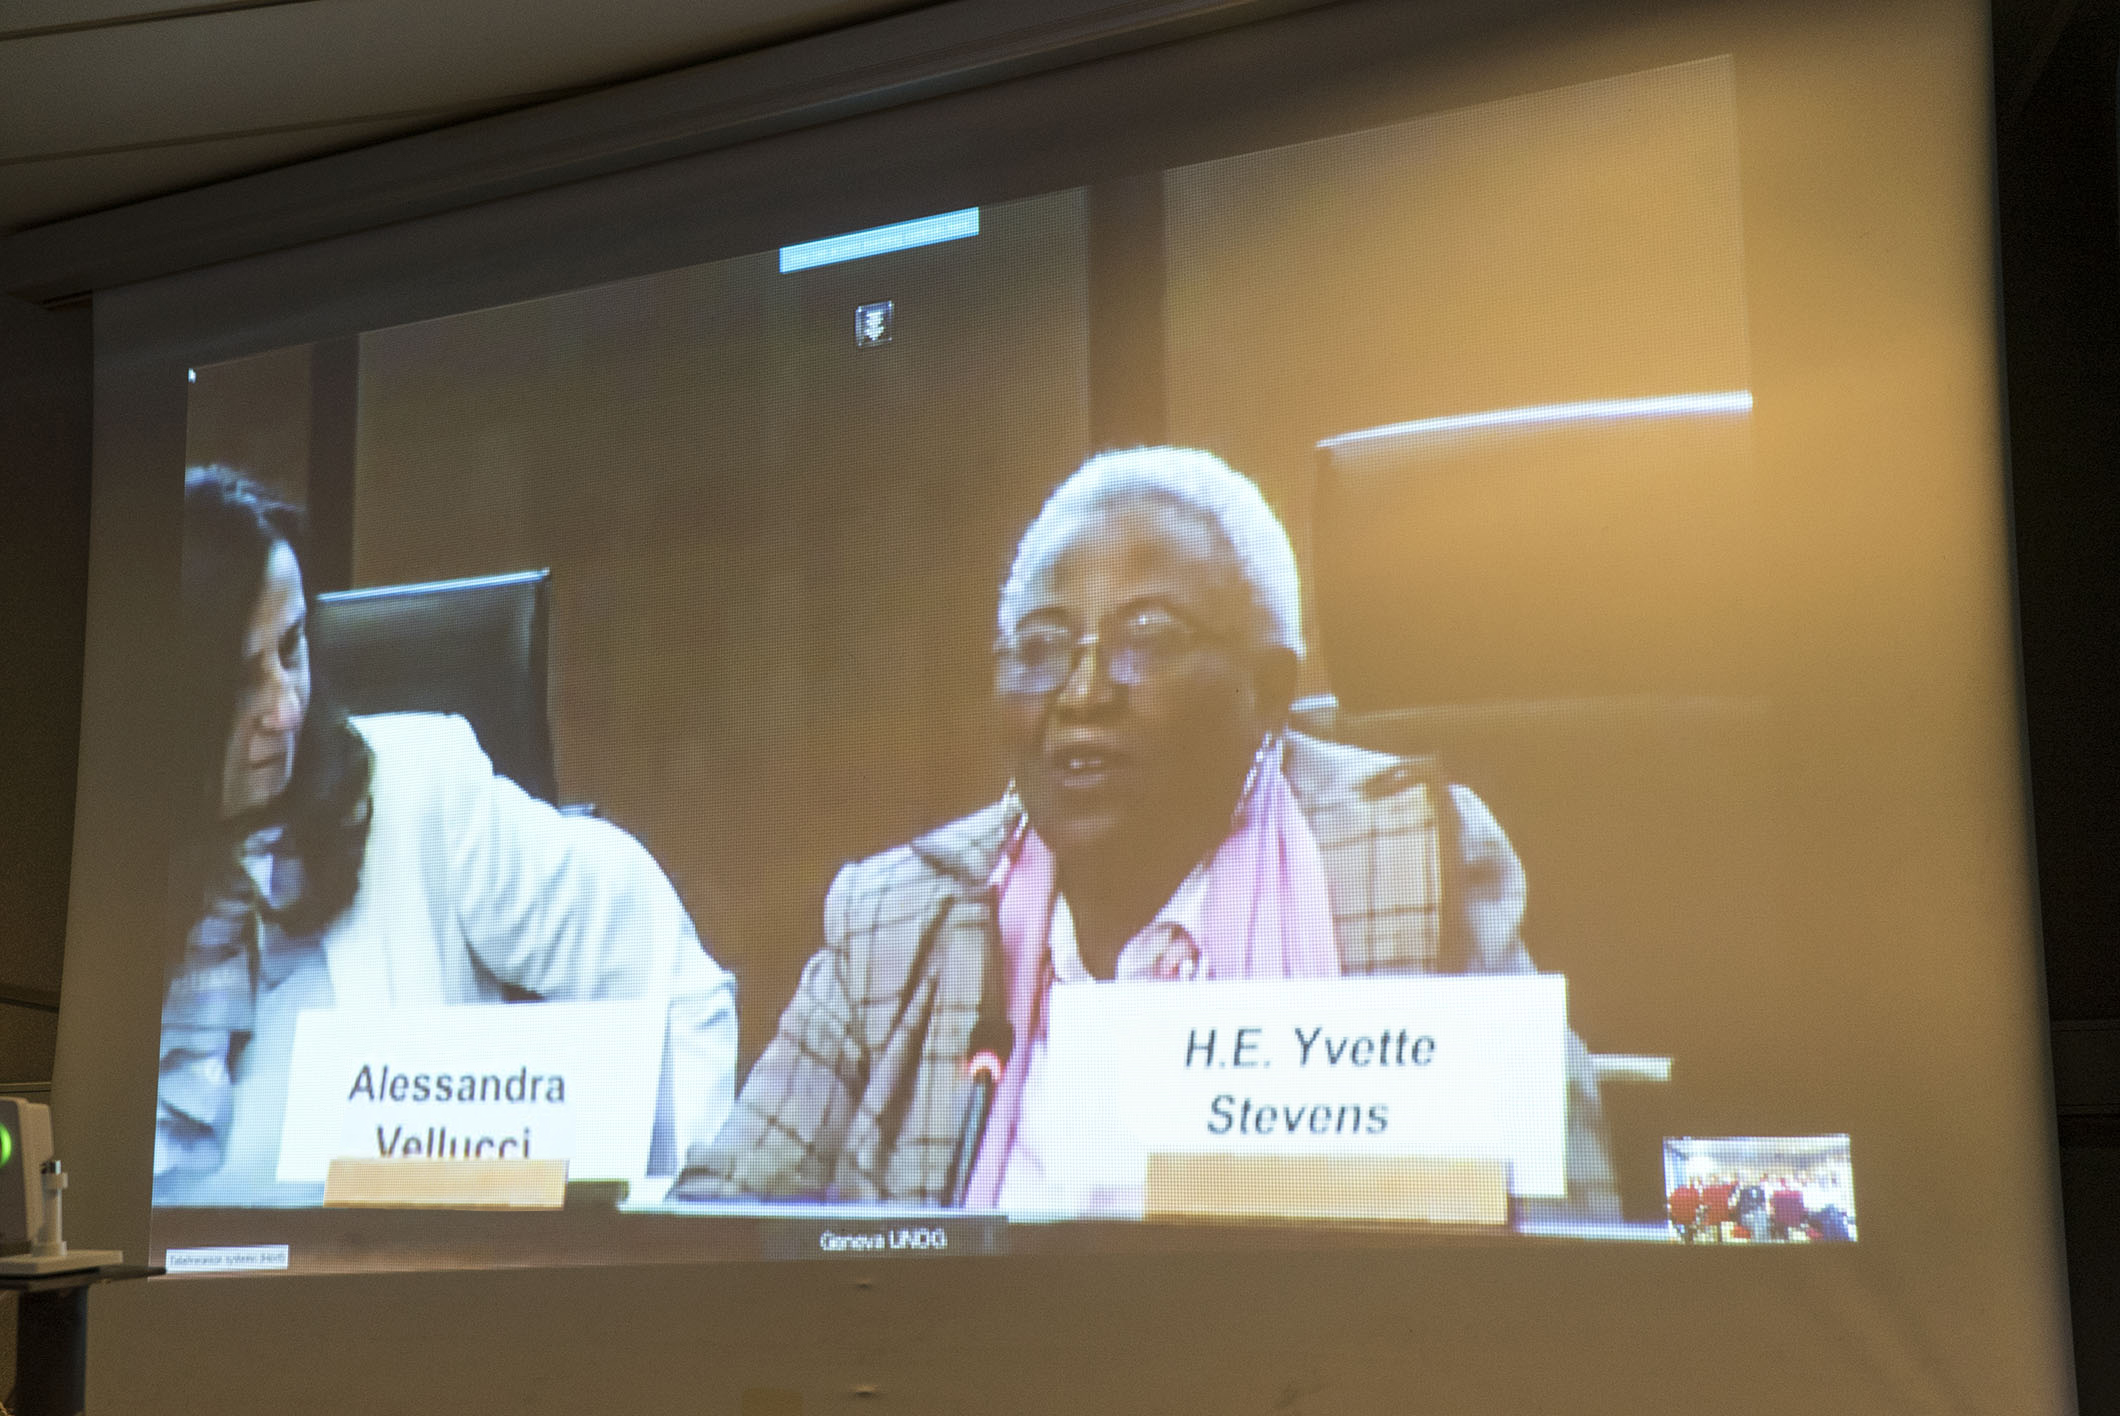 Ambassador Yvette Stevens, Permanent Representative of Sierra Leone to the United Nations, shared her experiences about the 2017 mud slide which killed over 300 people (Source: EOS/ Monika Naranjo Gonzales)